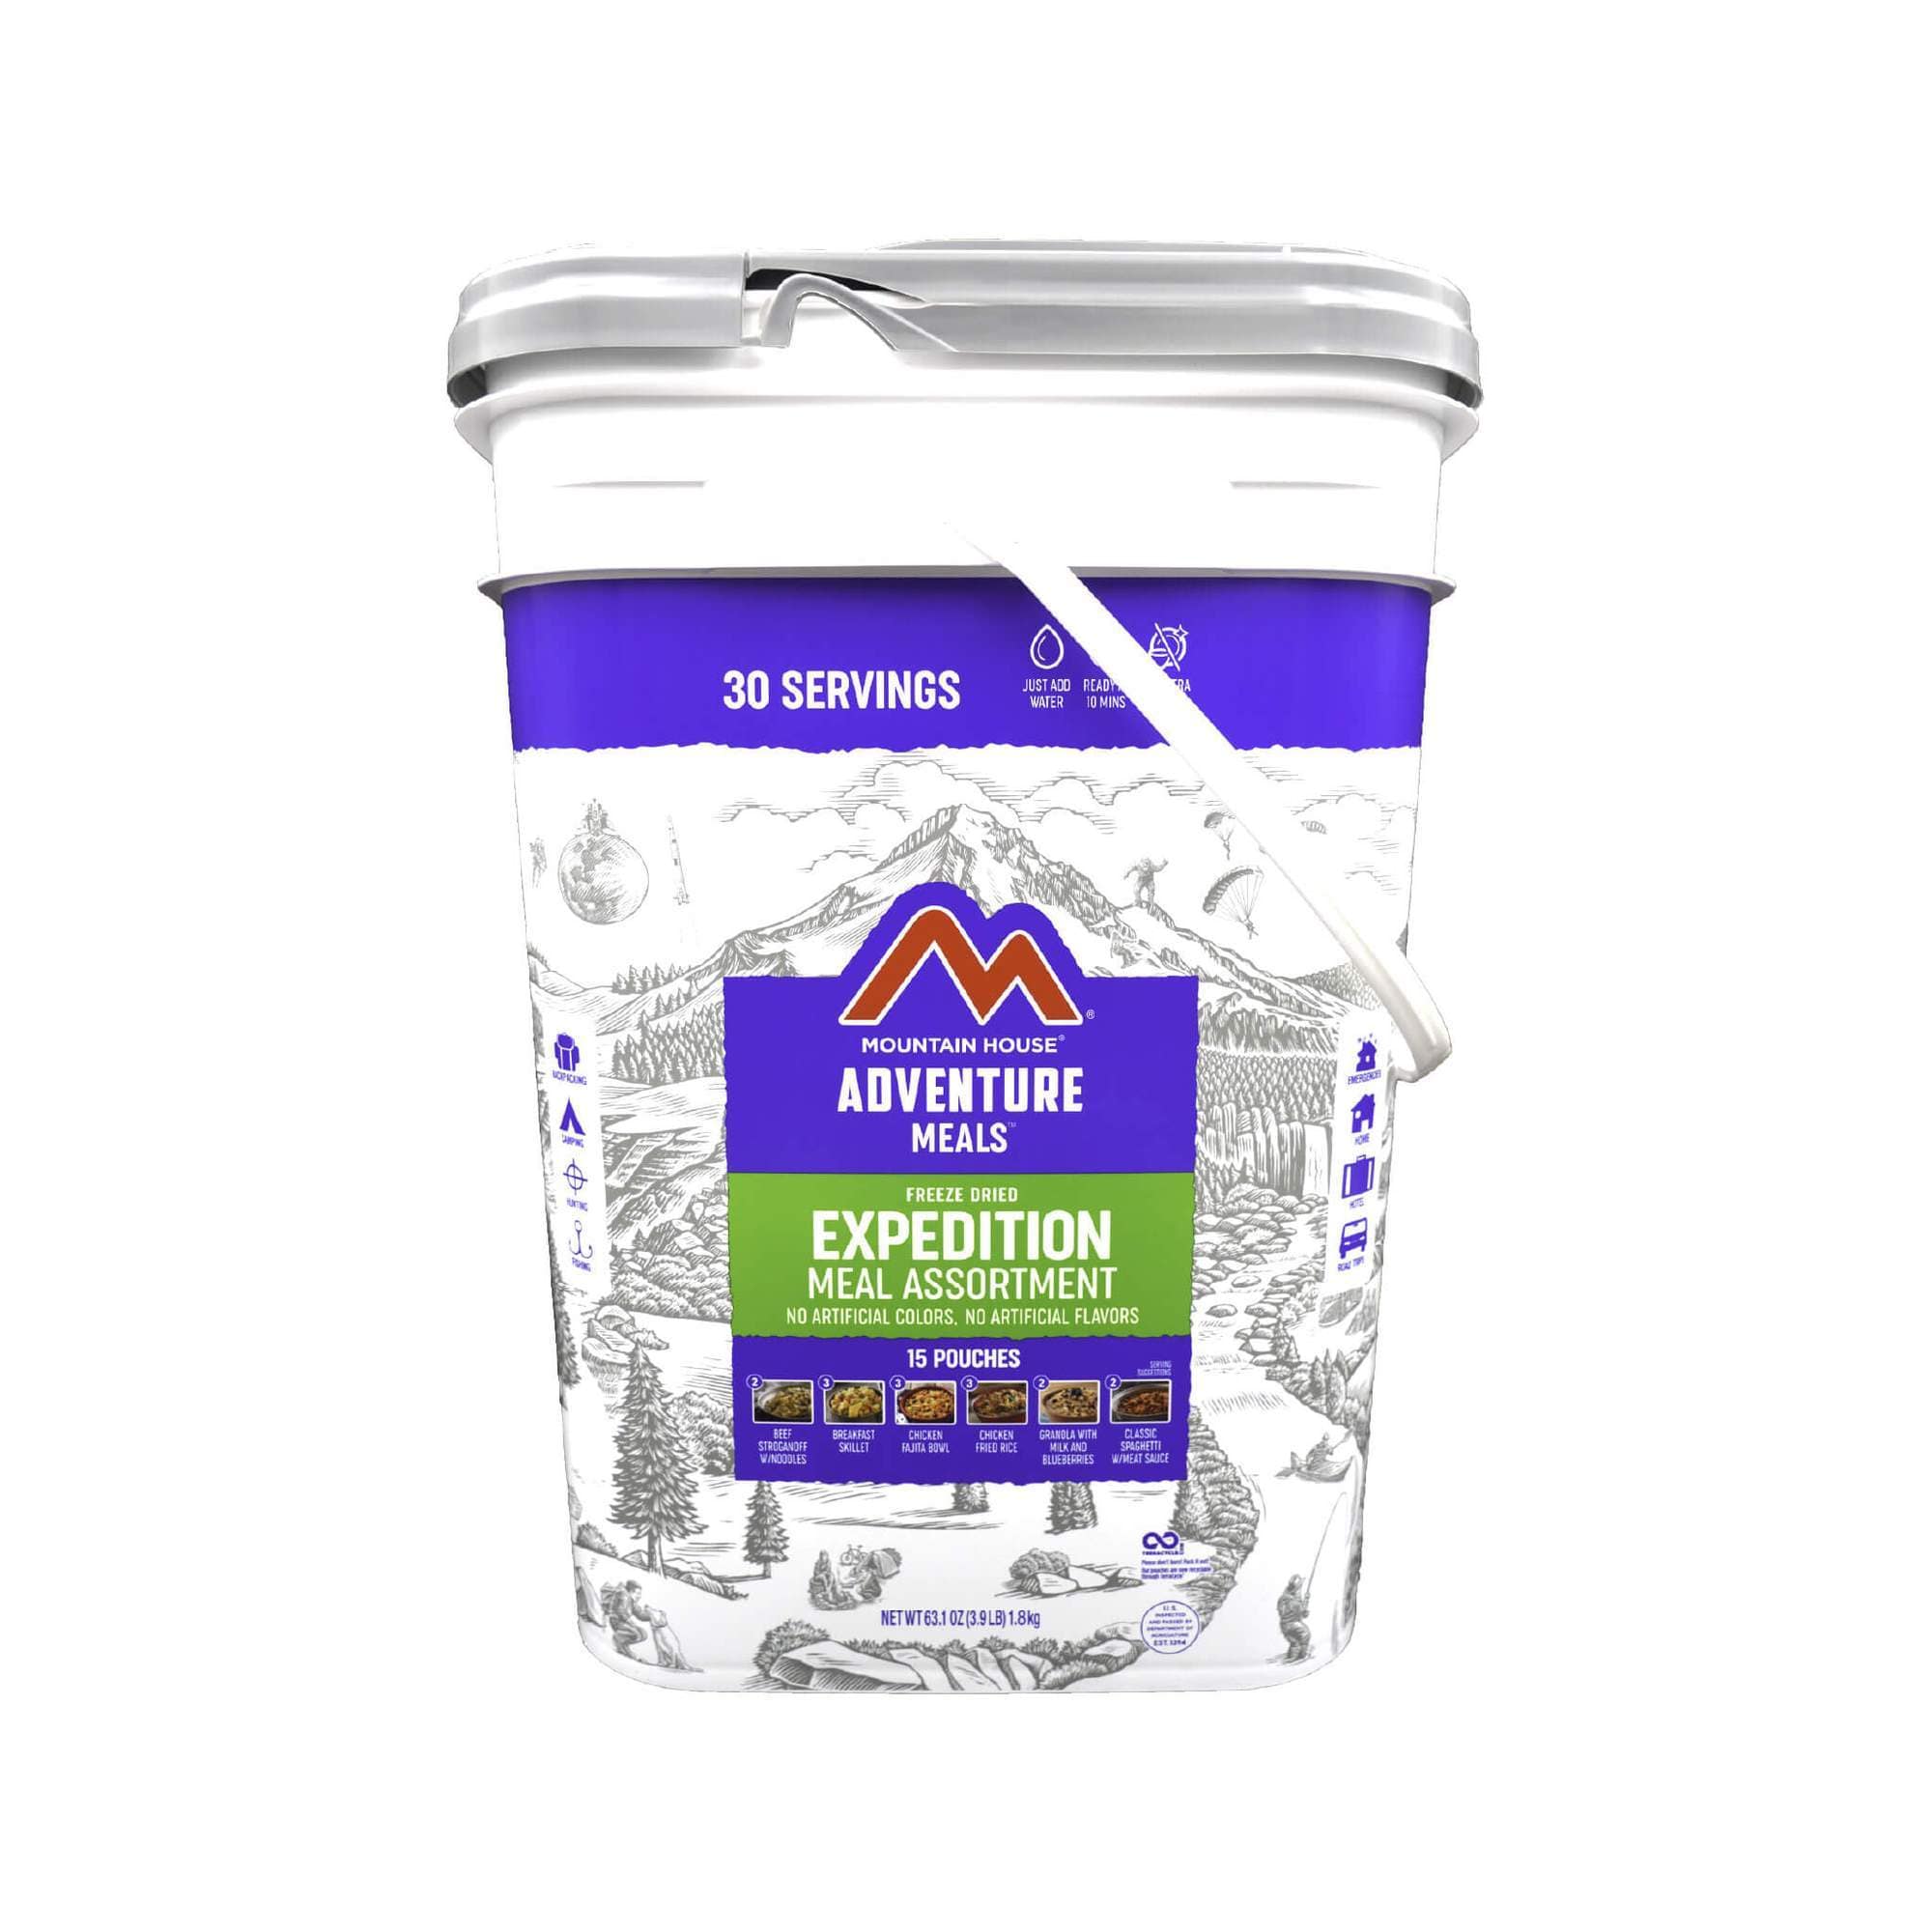 mountain-house-emergency-kits-expedition-meal-assortment-bucket-5-day-meal-kit-28068675190866 image